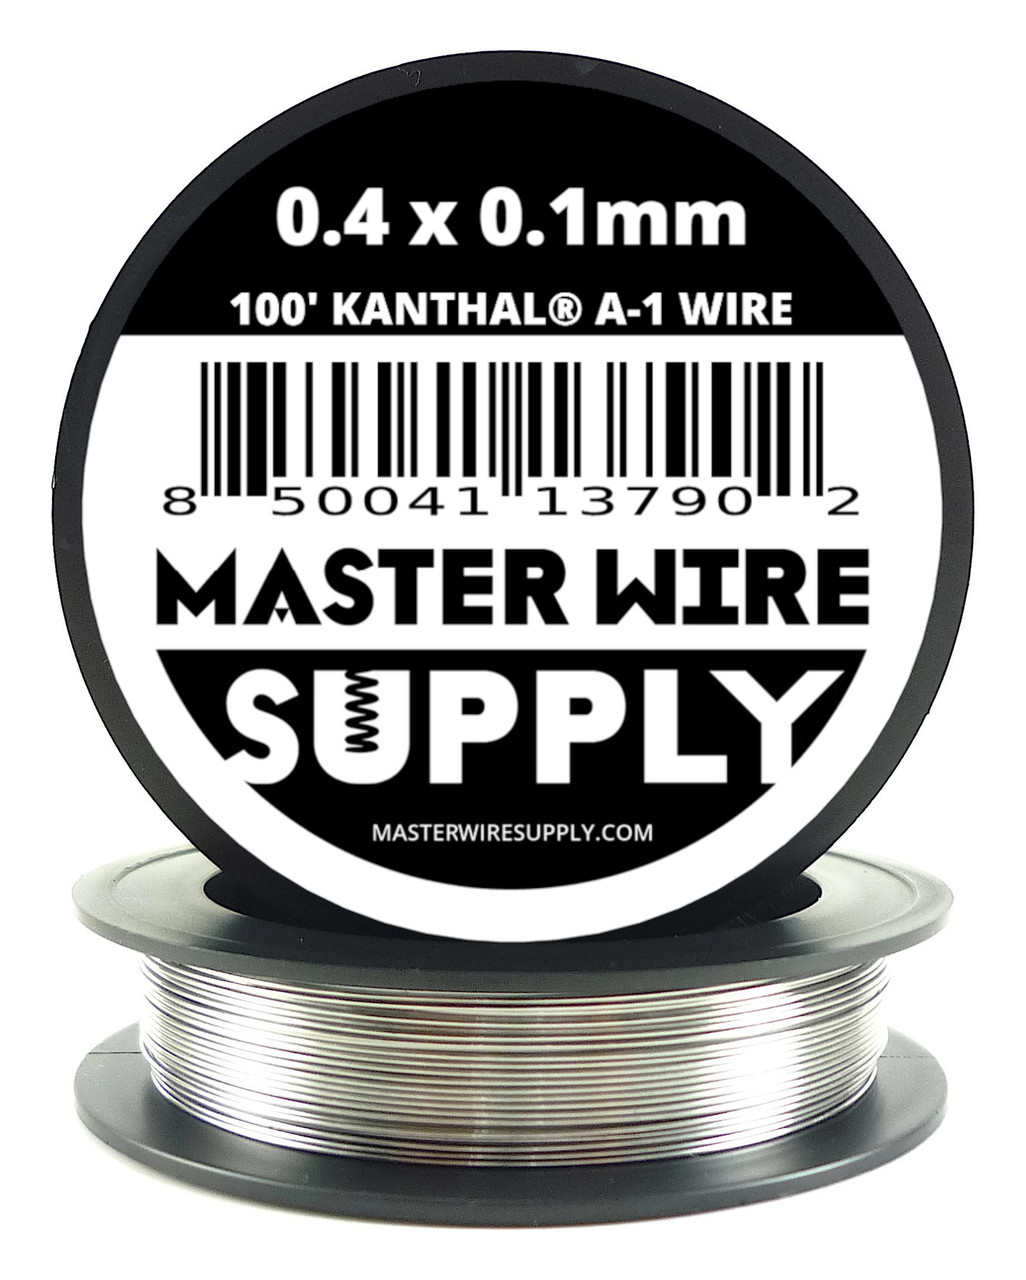 MWS - 100 ft - 0.4 mm x 0.1 mm Kanthal A1 Flat Ribbon Wire - Master Wire  Supply